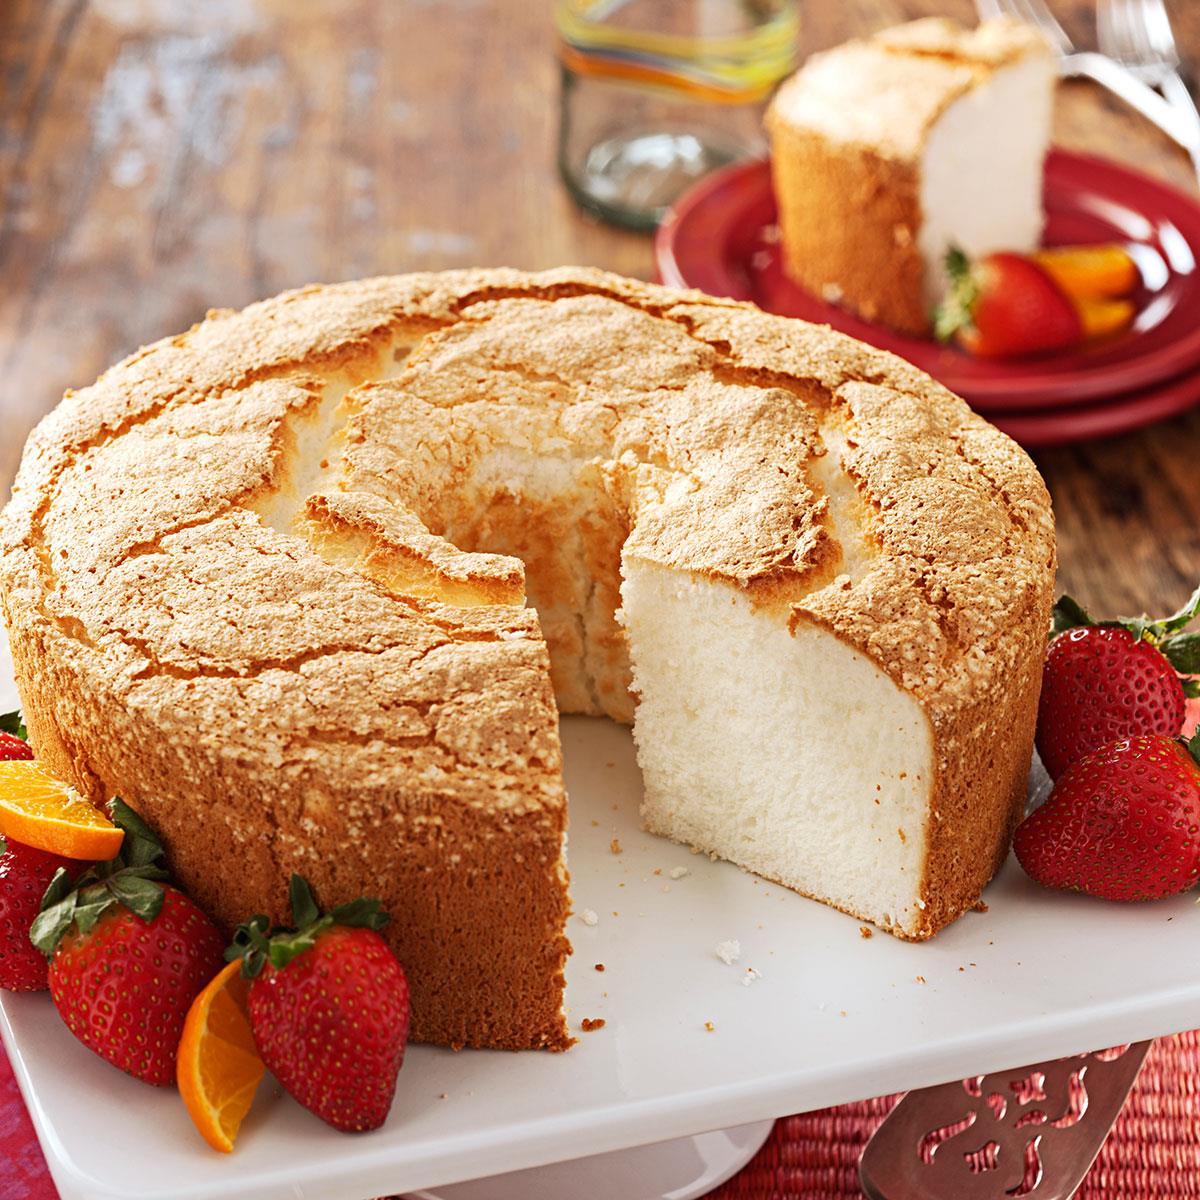 What Cake Matches Your Vibe? Angel food cake